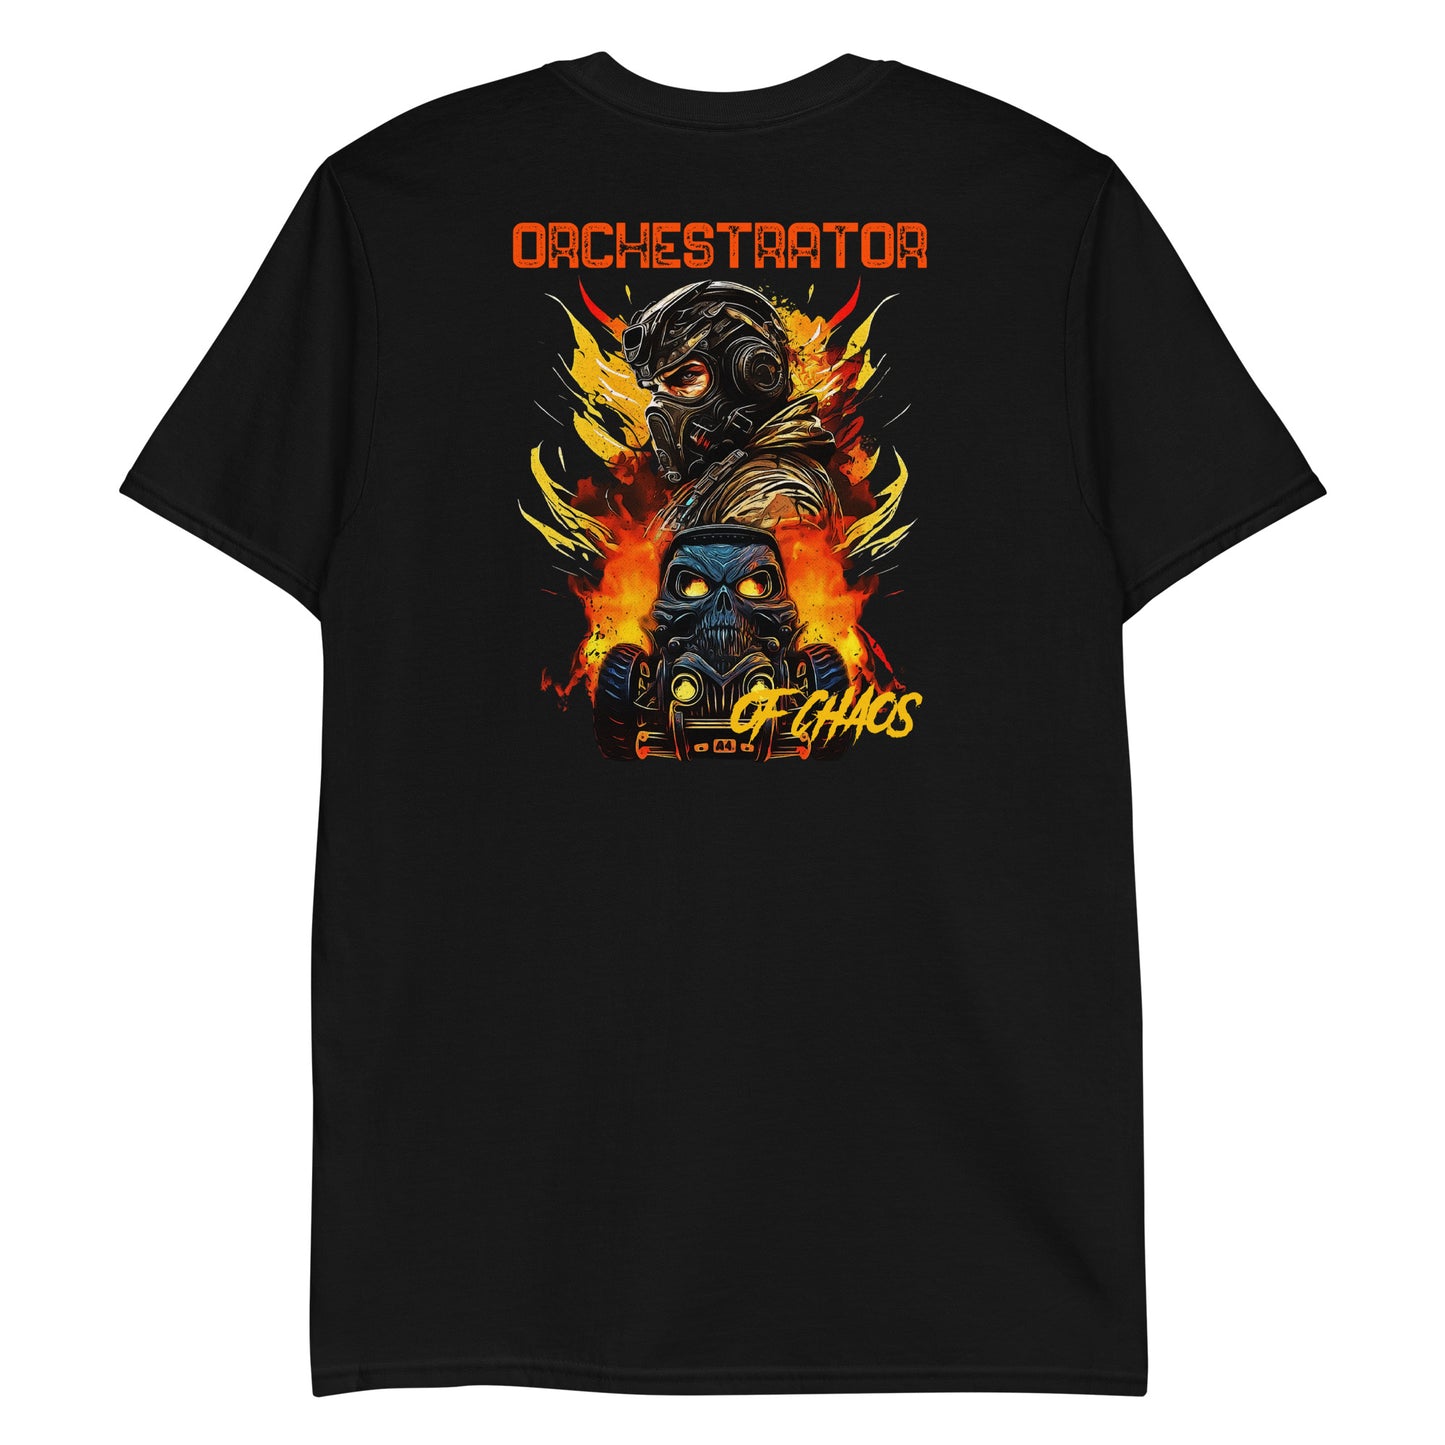 Orchestrator of Chaos T-Shirt